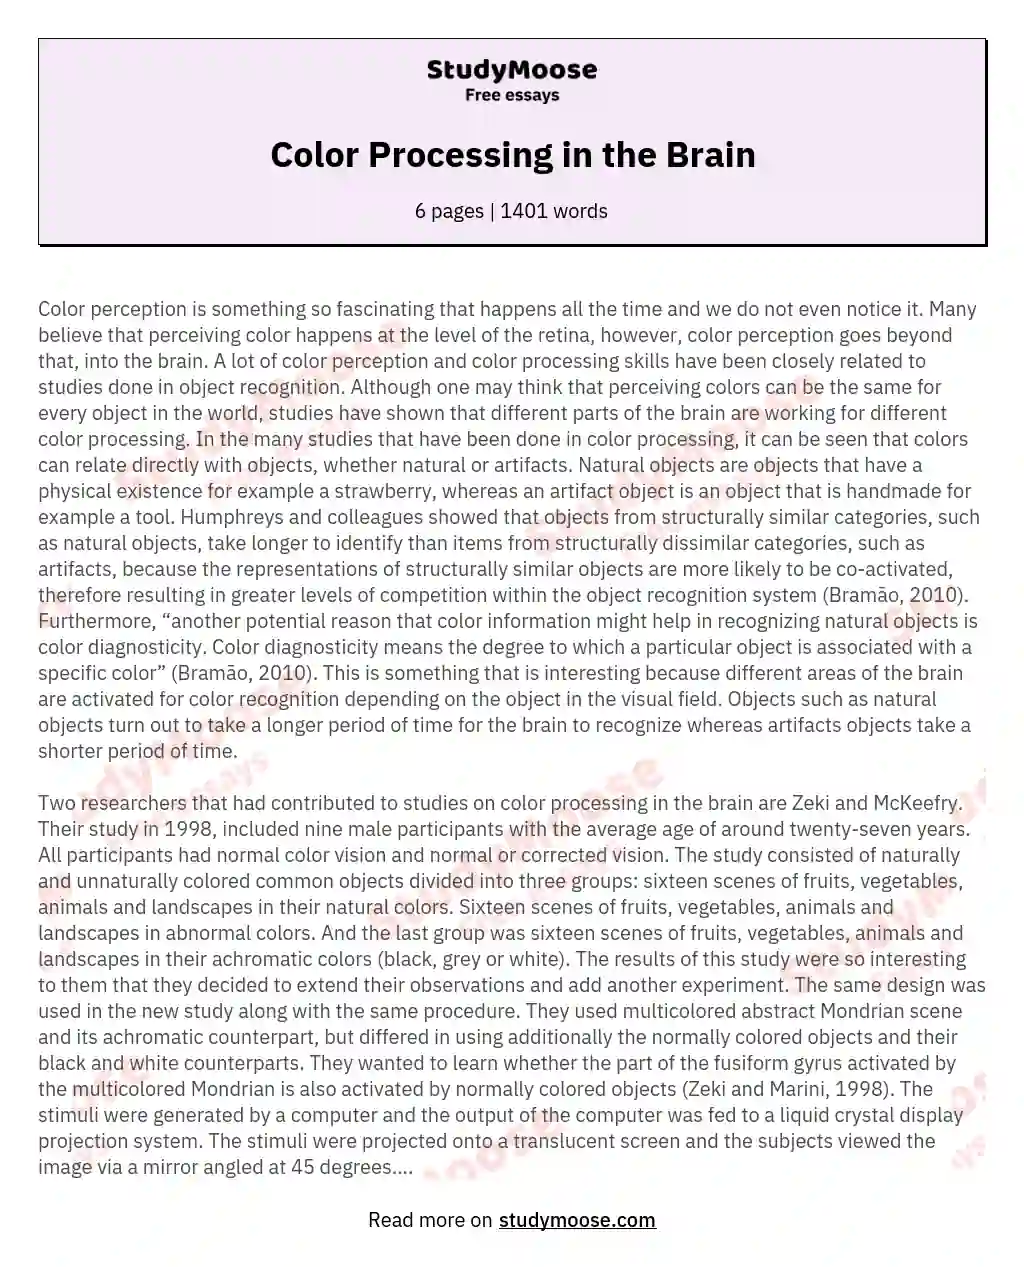 Color Processing in the Brain essay